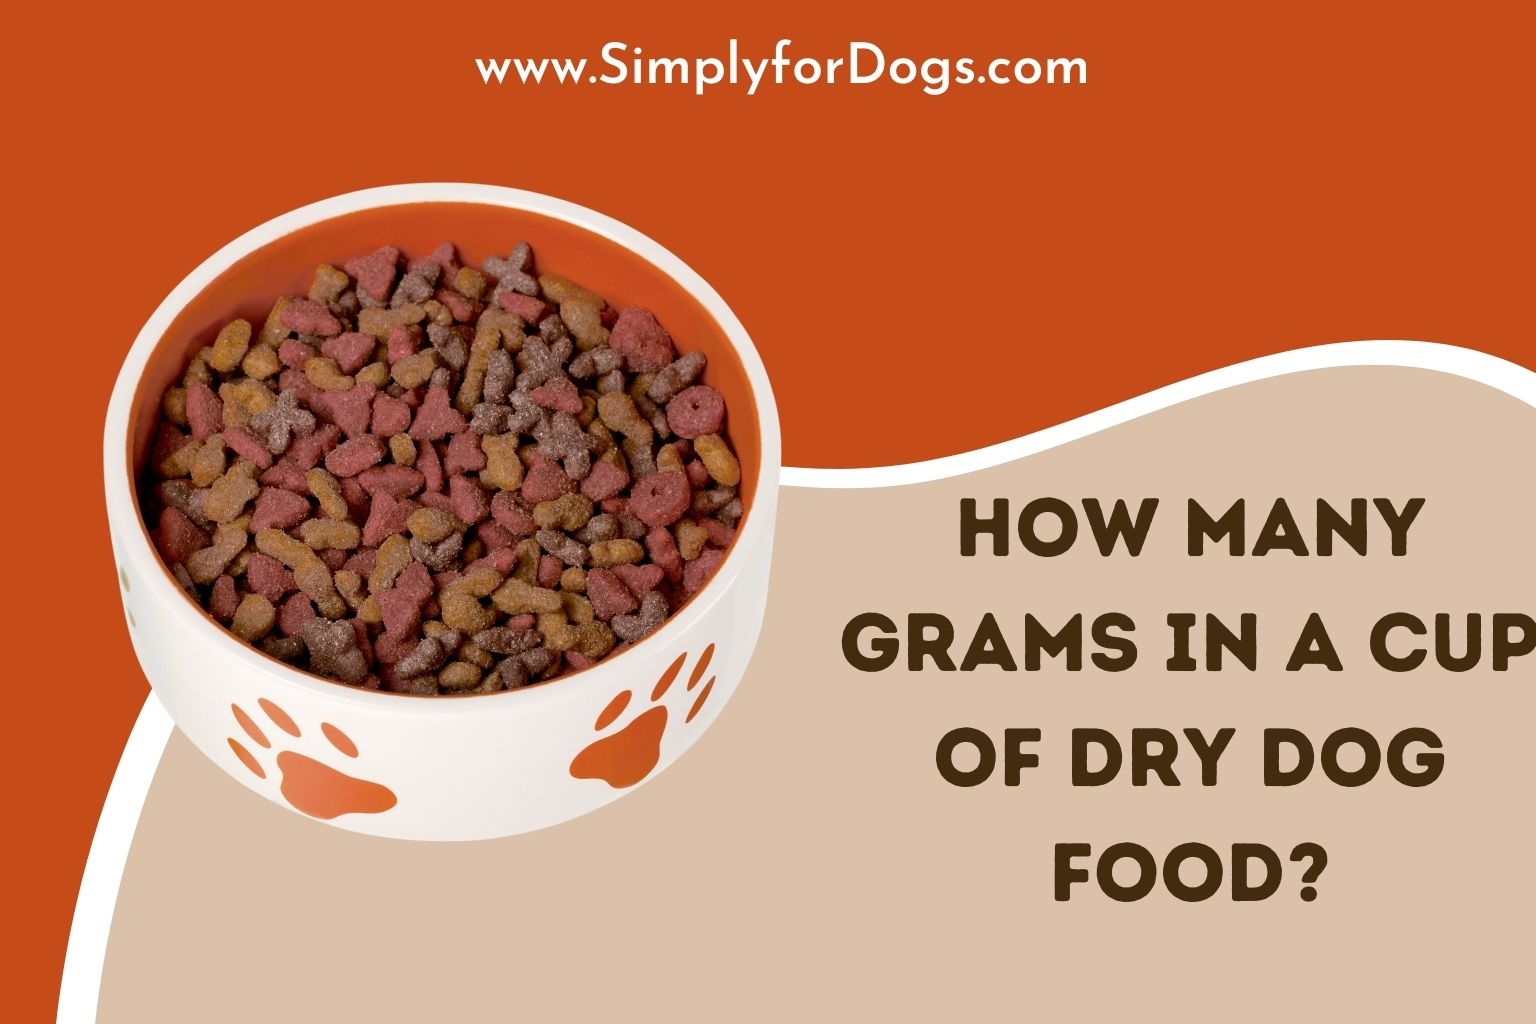 How Many Grams in a Cup of Dry Dog Food